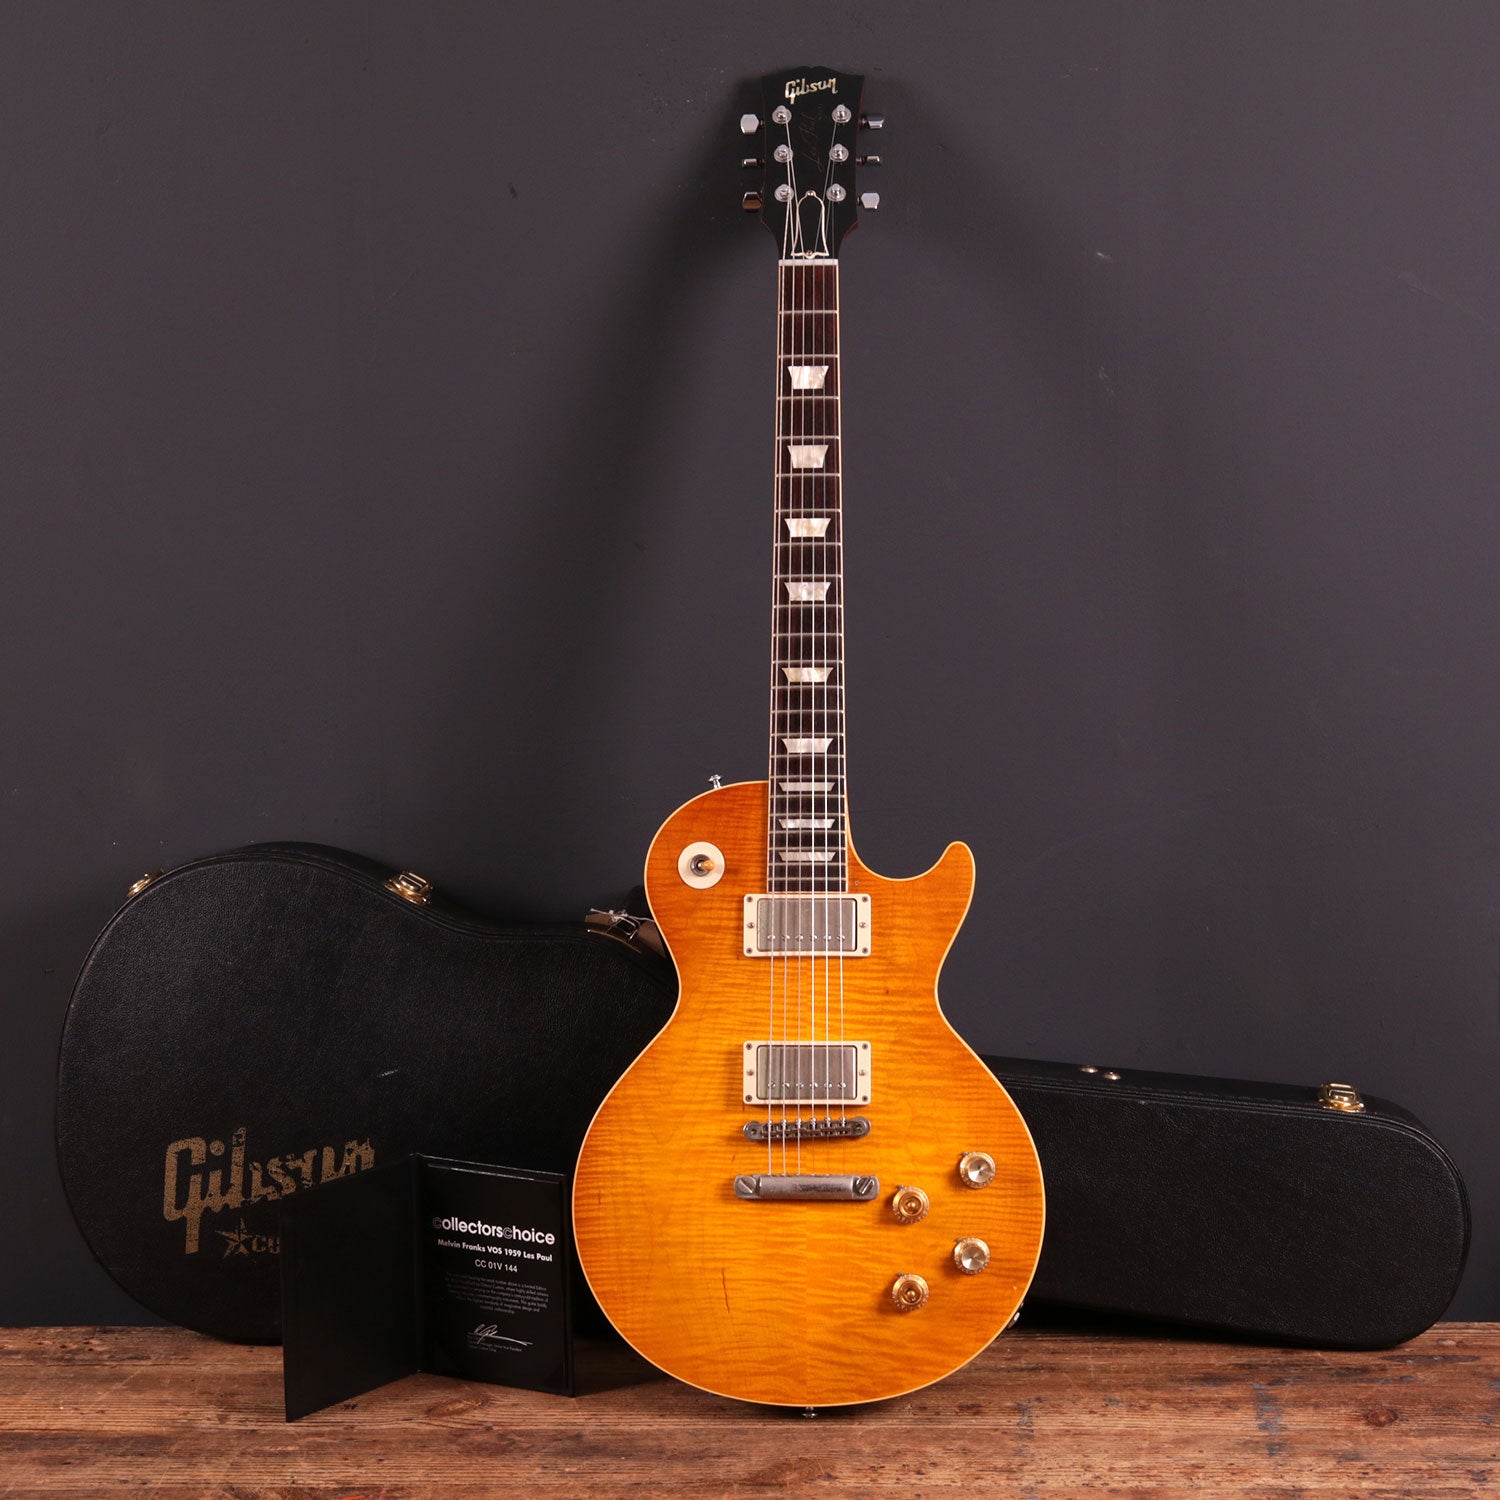 2010 Gibson Collectors Choice CC#1 VOS Les Paul Standard, Gary Moore,  Melvyn Franks, Greeny ‘Burst